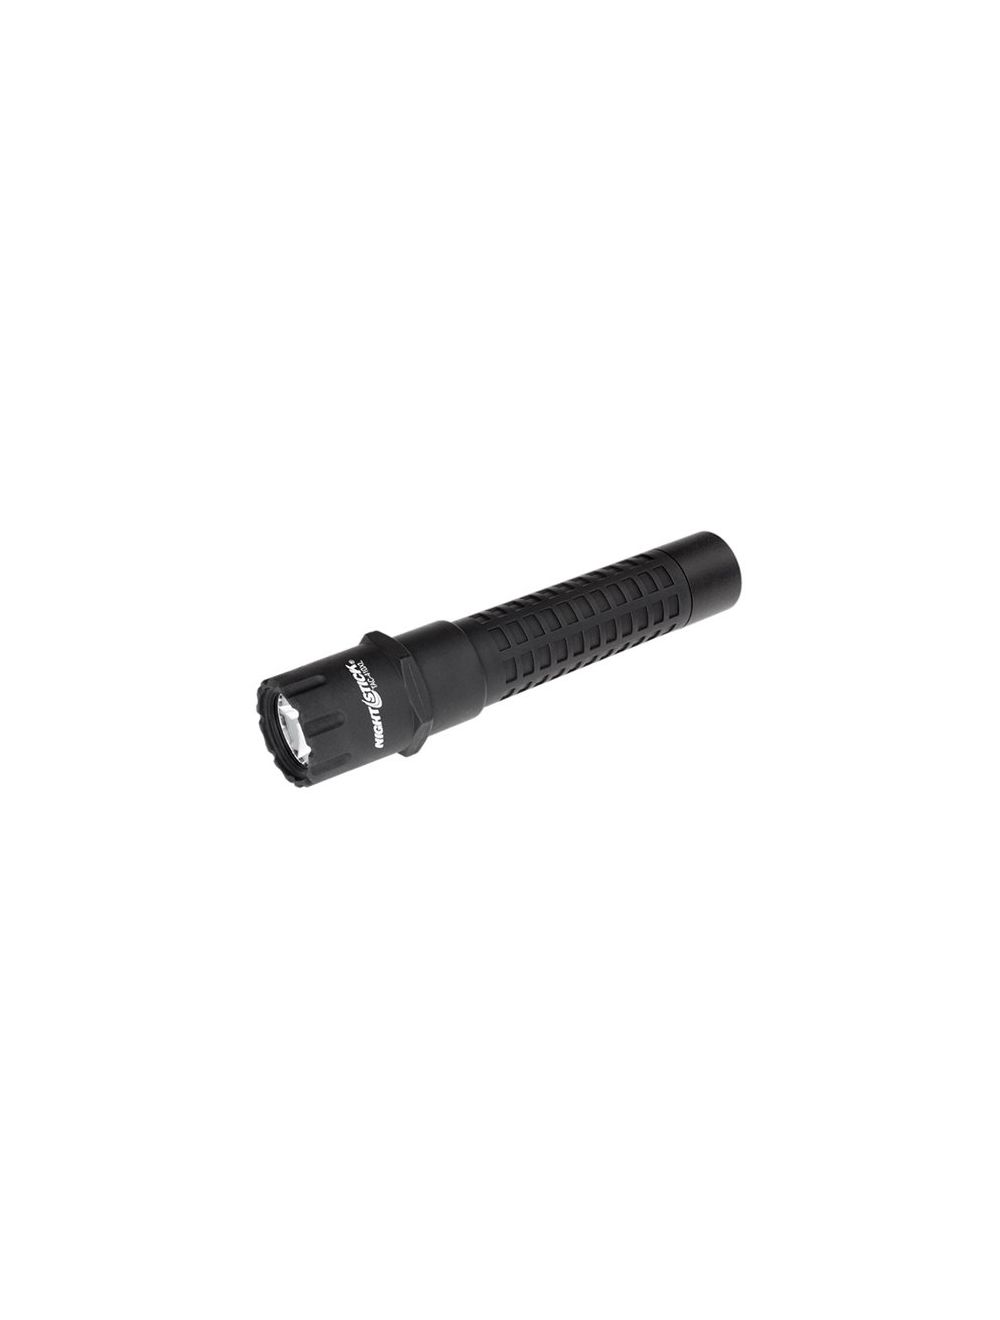 Xtreme Lumens Polymer Tactical Rechargeable Flashlight